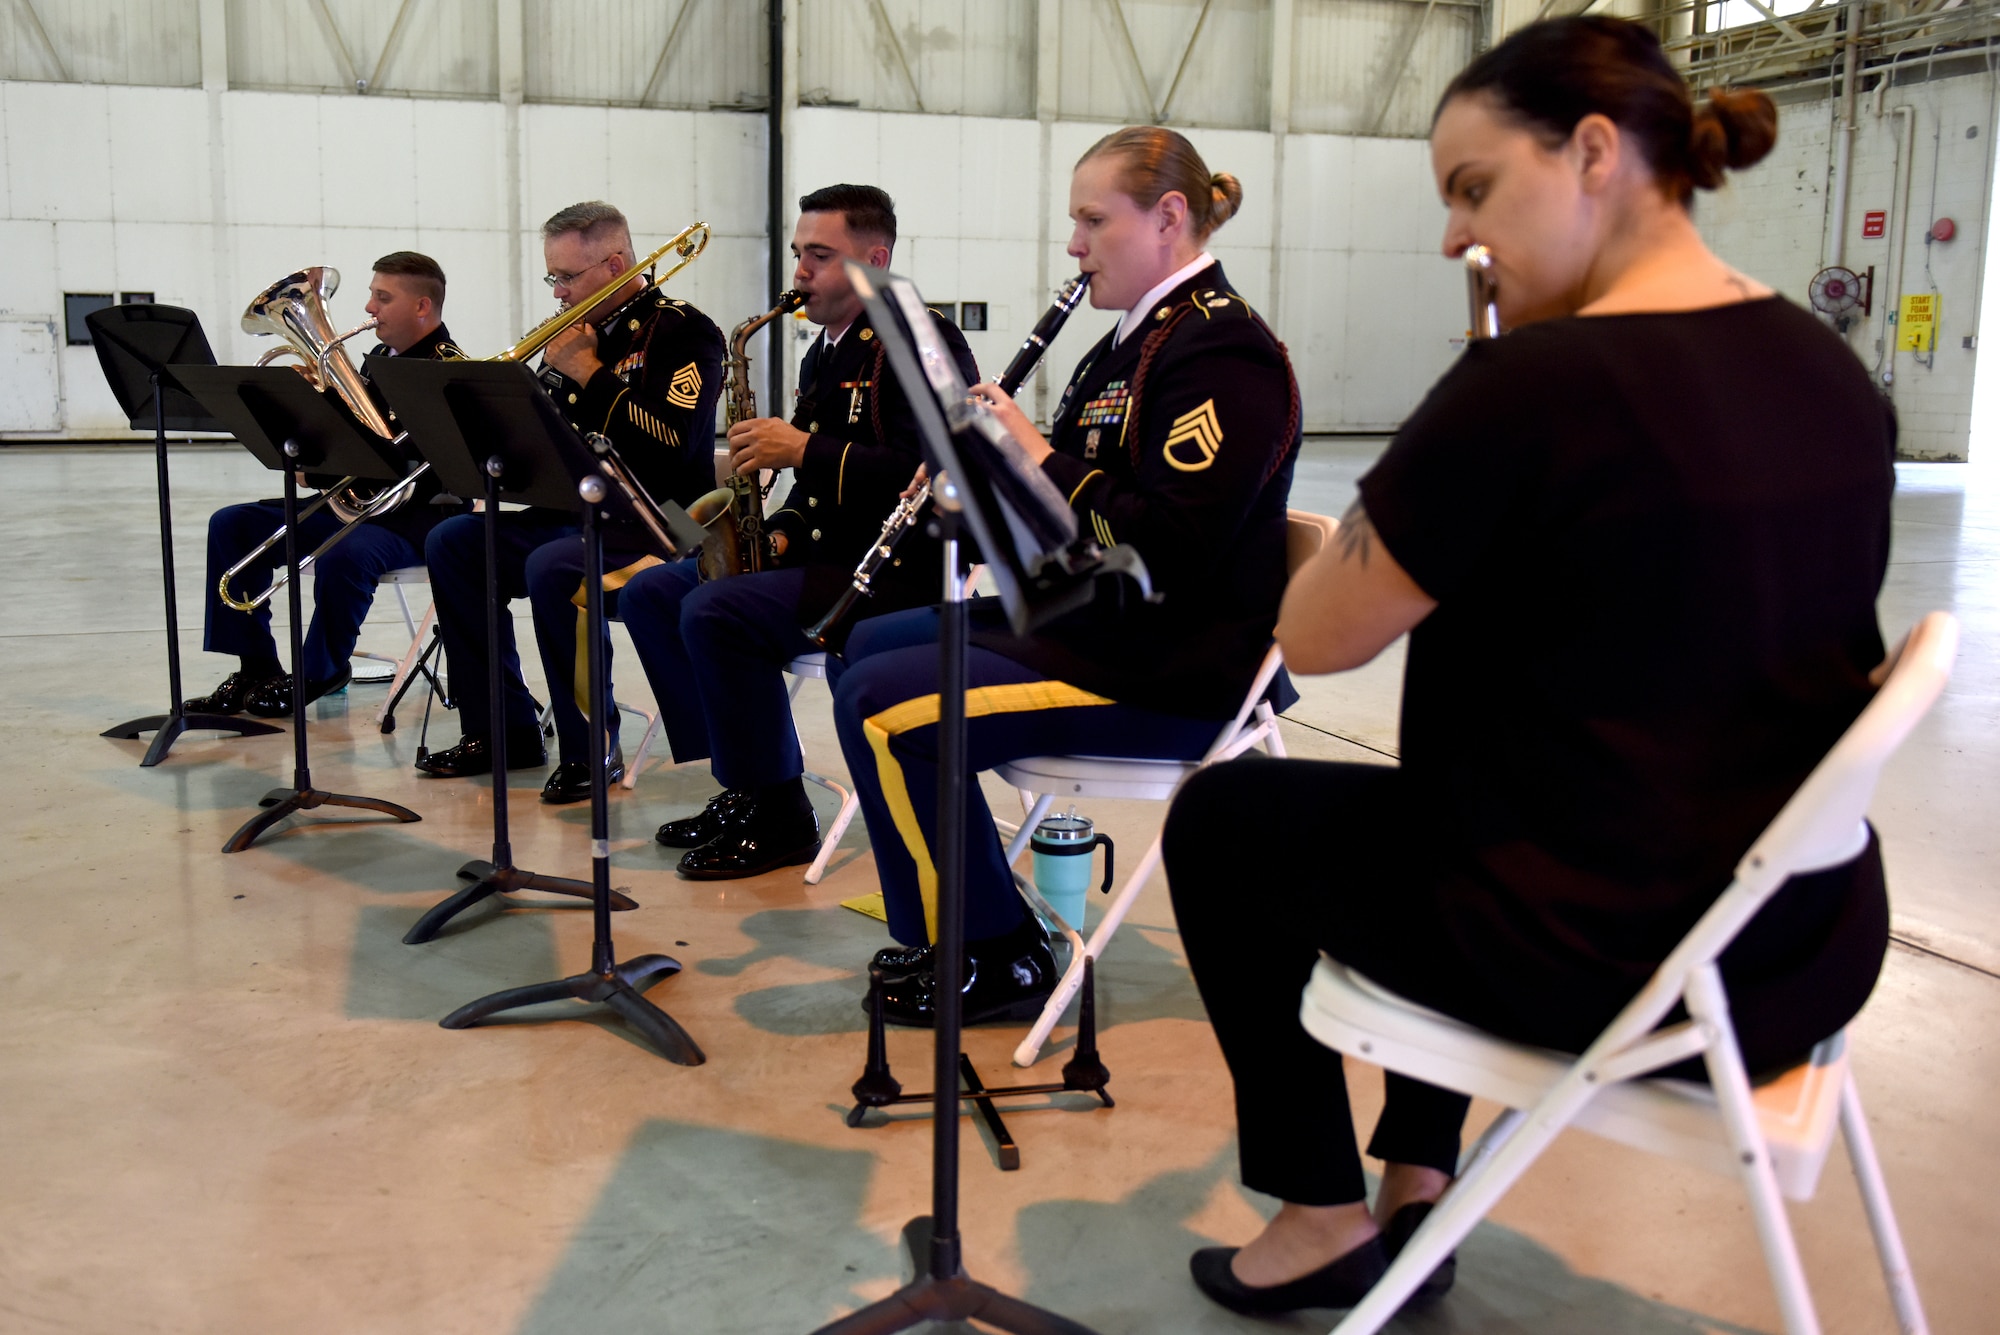 Members of the 440th Army Band practice in a hangar at the North Carolina Air National Guard Base, Charlotte Douglas International Airport, June 9, 2019 prior to the Building Dedication Ceremony to honor four fallen Airmen, U.S. Air Force Lt. Col. Paul K. Mikeal, Maj. Joseph M. McCormick, Maj. Ryan S. David, and Senior Master Sgt. Robert S. Cannon. The four Airmen tragically lost their lives seven years ago in the Modular Airborne Fire Fighting System (MAFFS) seven accident while fighting fires in South Dakota. These Airmen were part of the MAFFS seven crew and are remembered with building dedication ceremonies to honor their legacy for years to come.